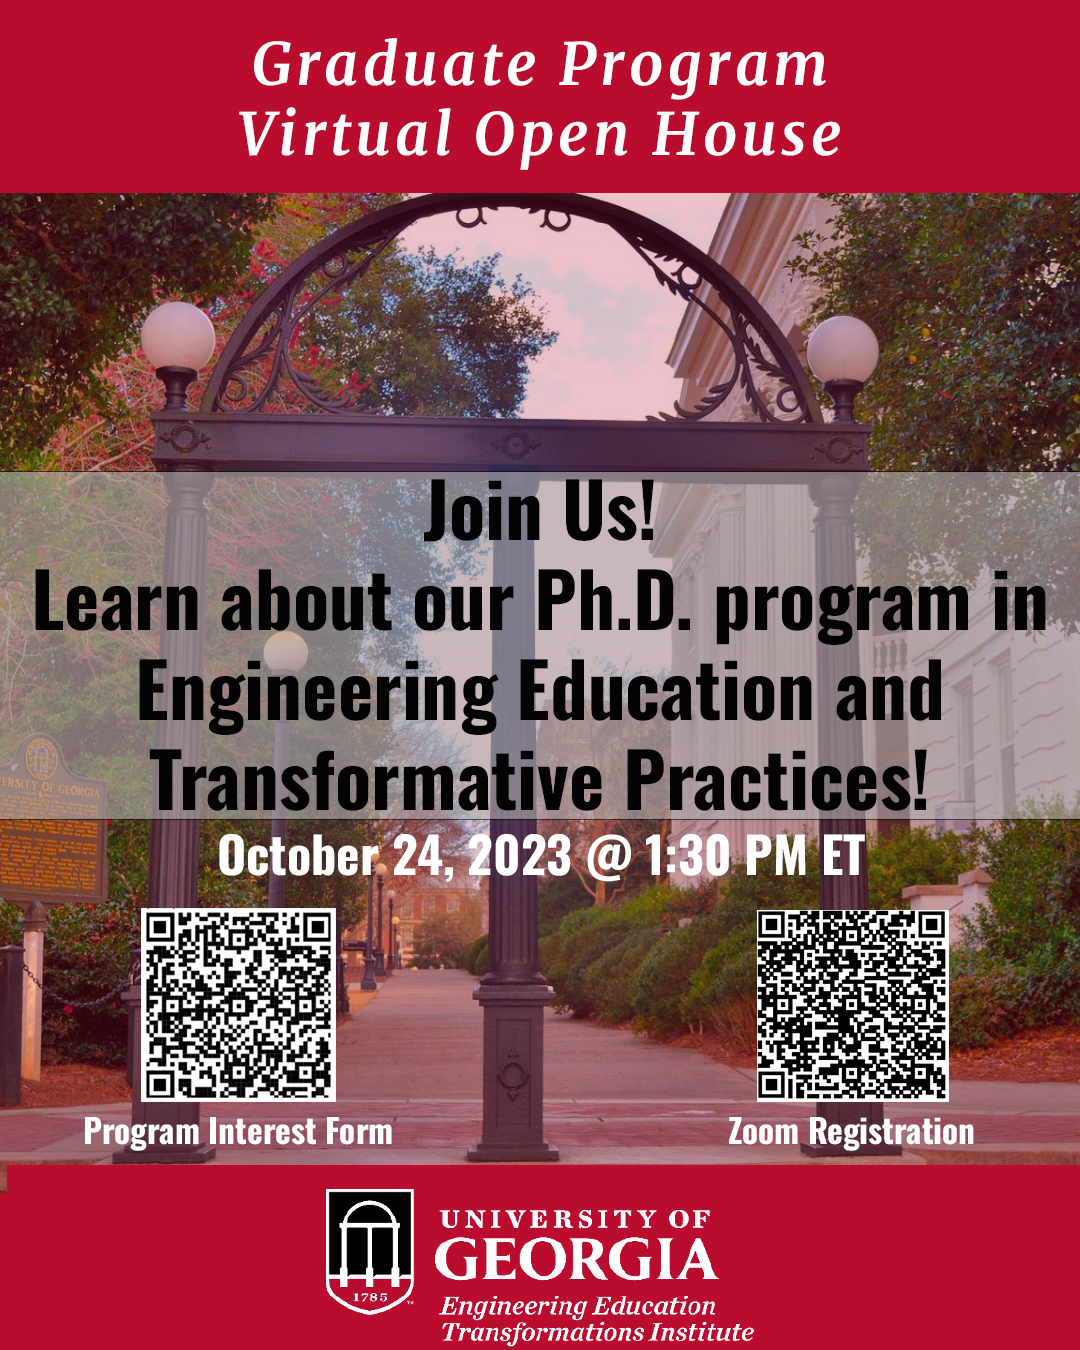 Join EETI for our Ph.D. program virtual open house on October 24!